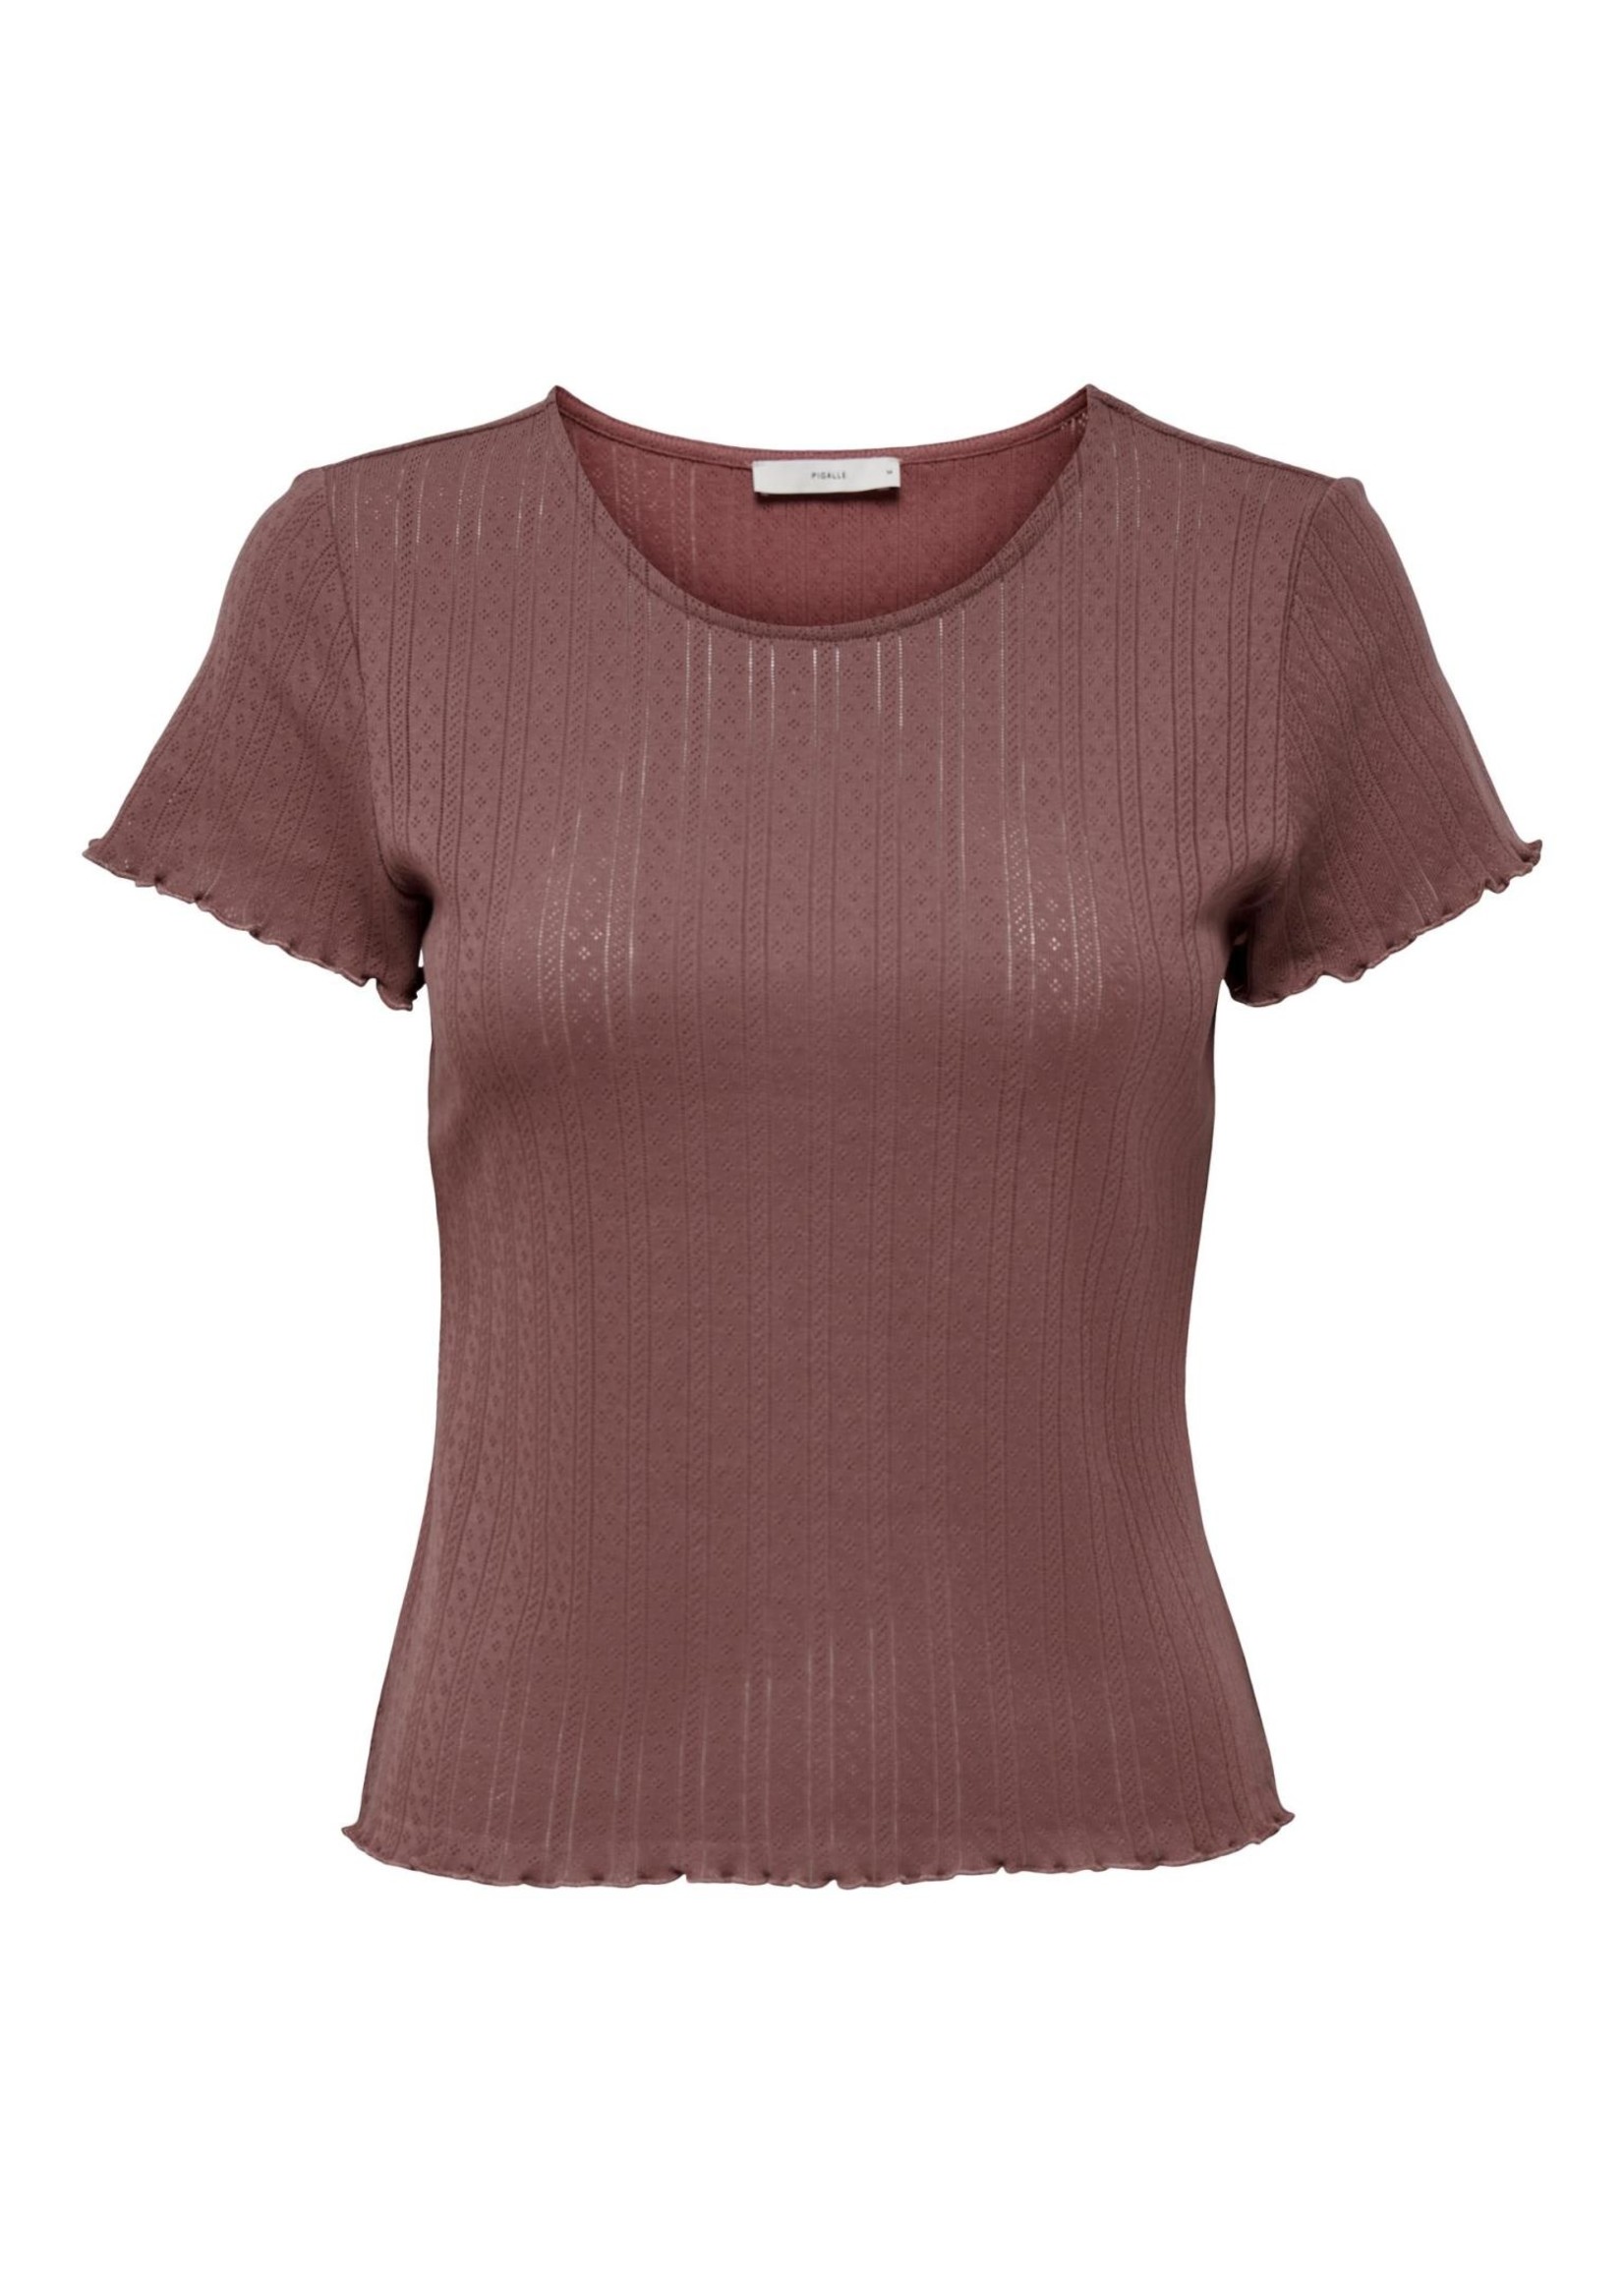 ONLY CARLOTTA S/S TOP JRS NOOS rose brown